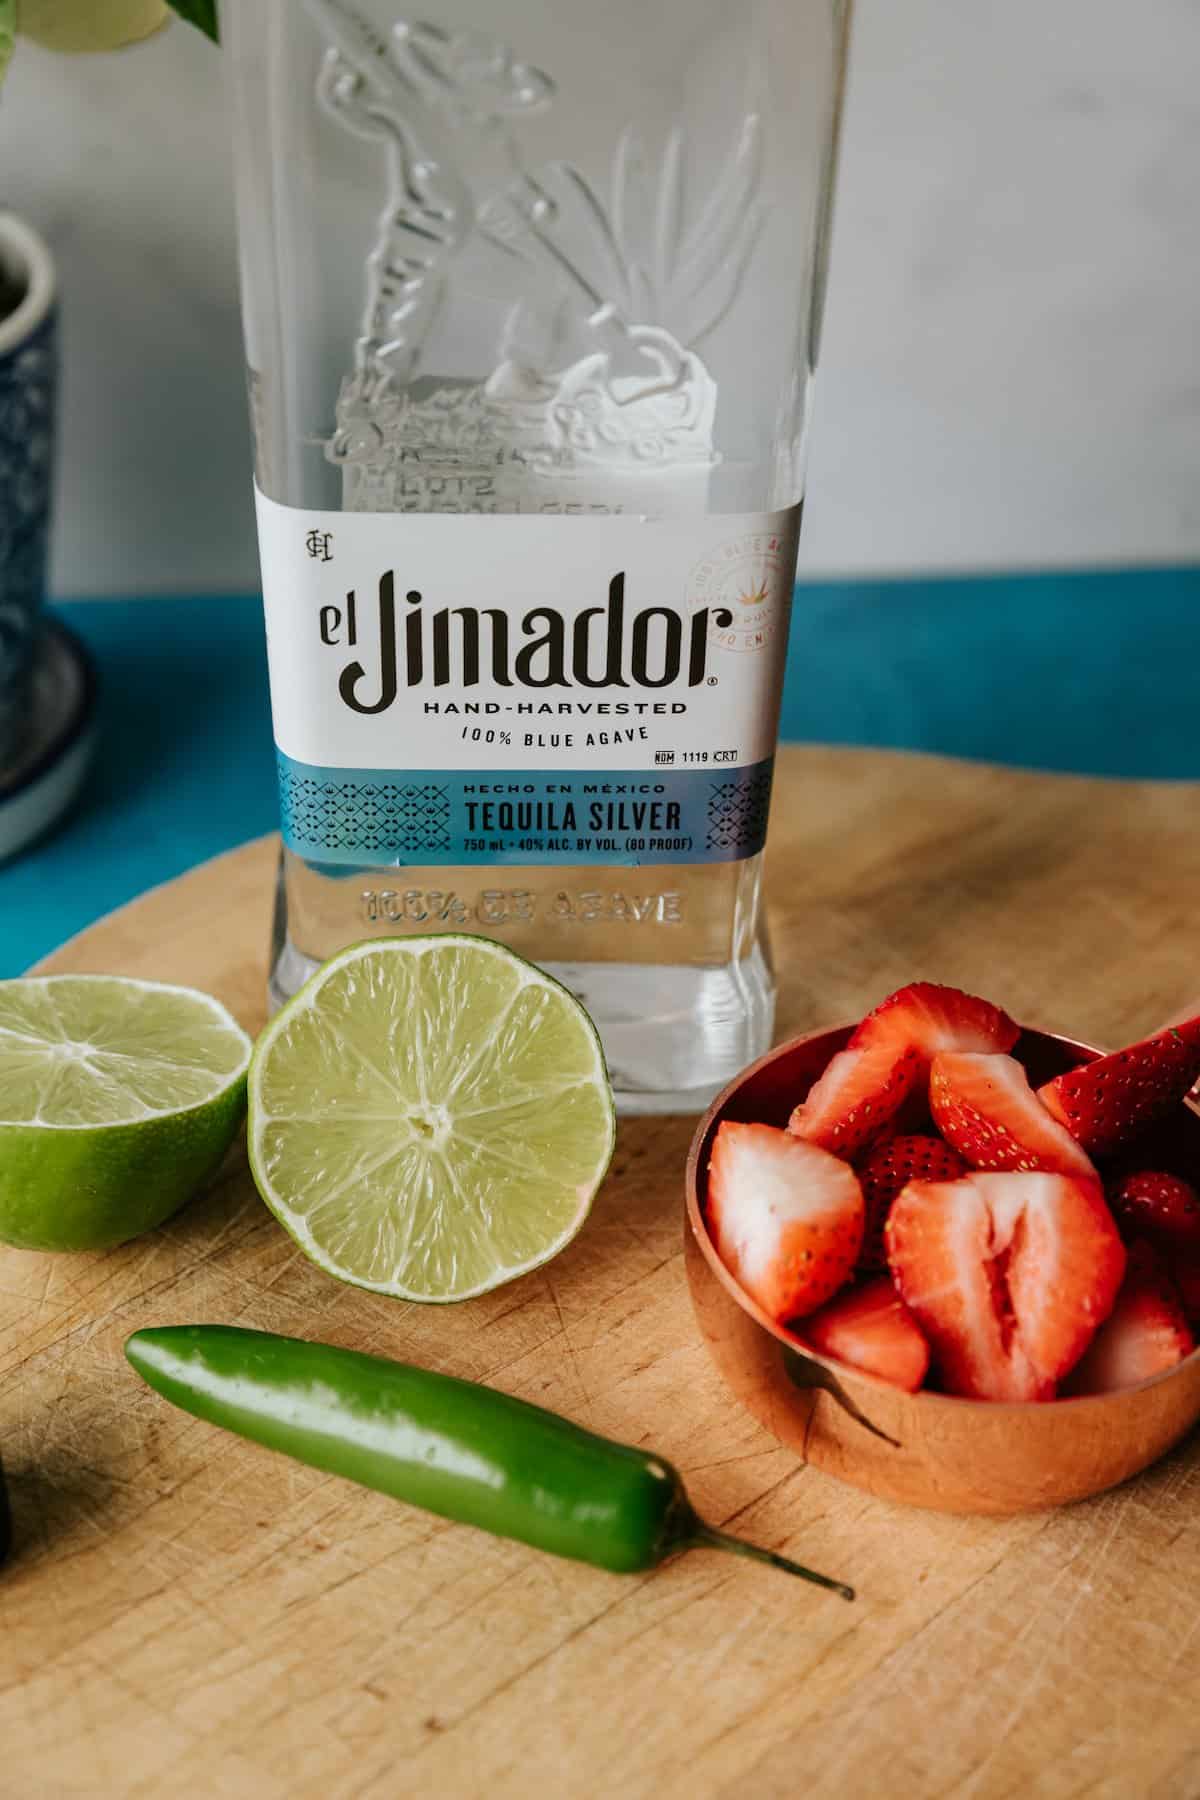 bottle of el jimador tequila blanco on a wooden cutting board with a halved lime, some sliced strawberries, and a serrano pepper.